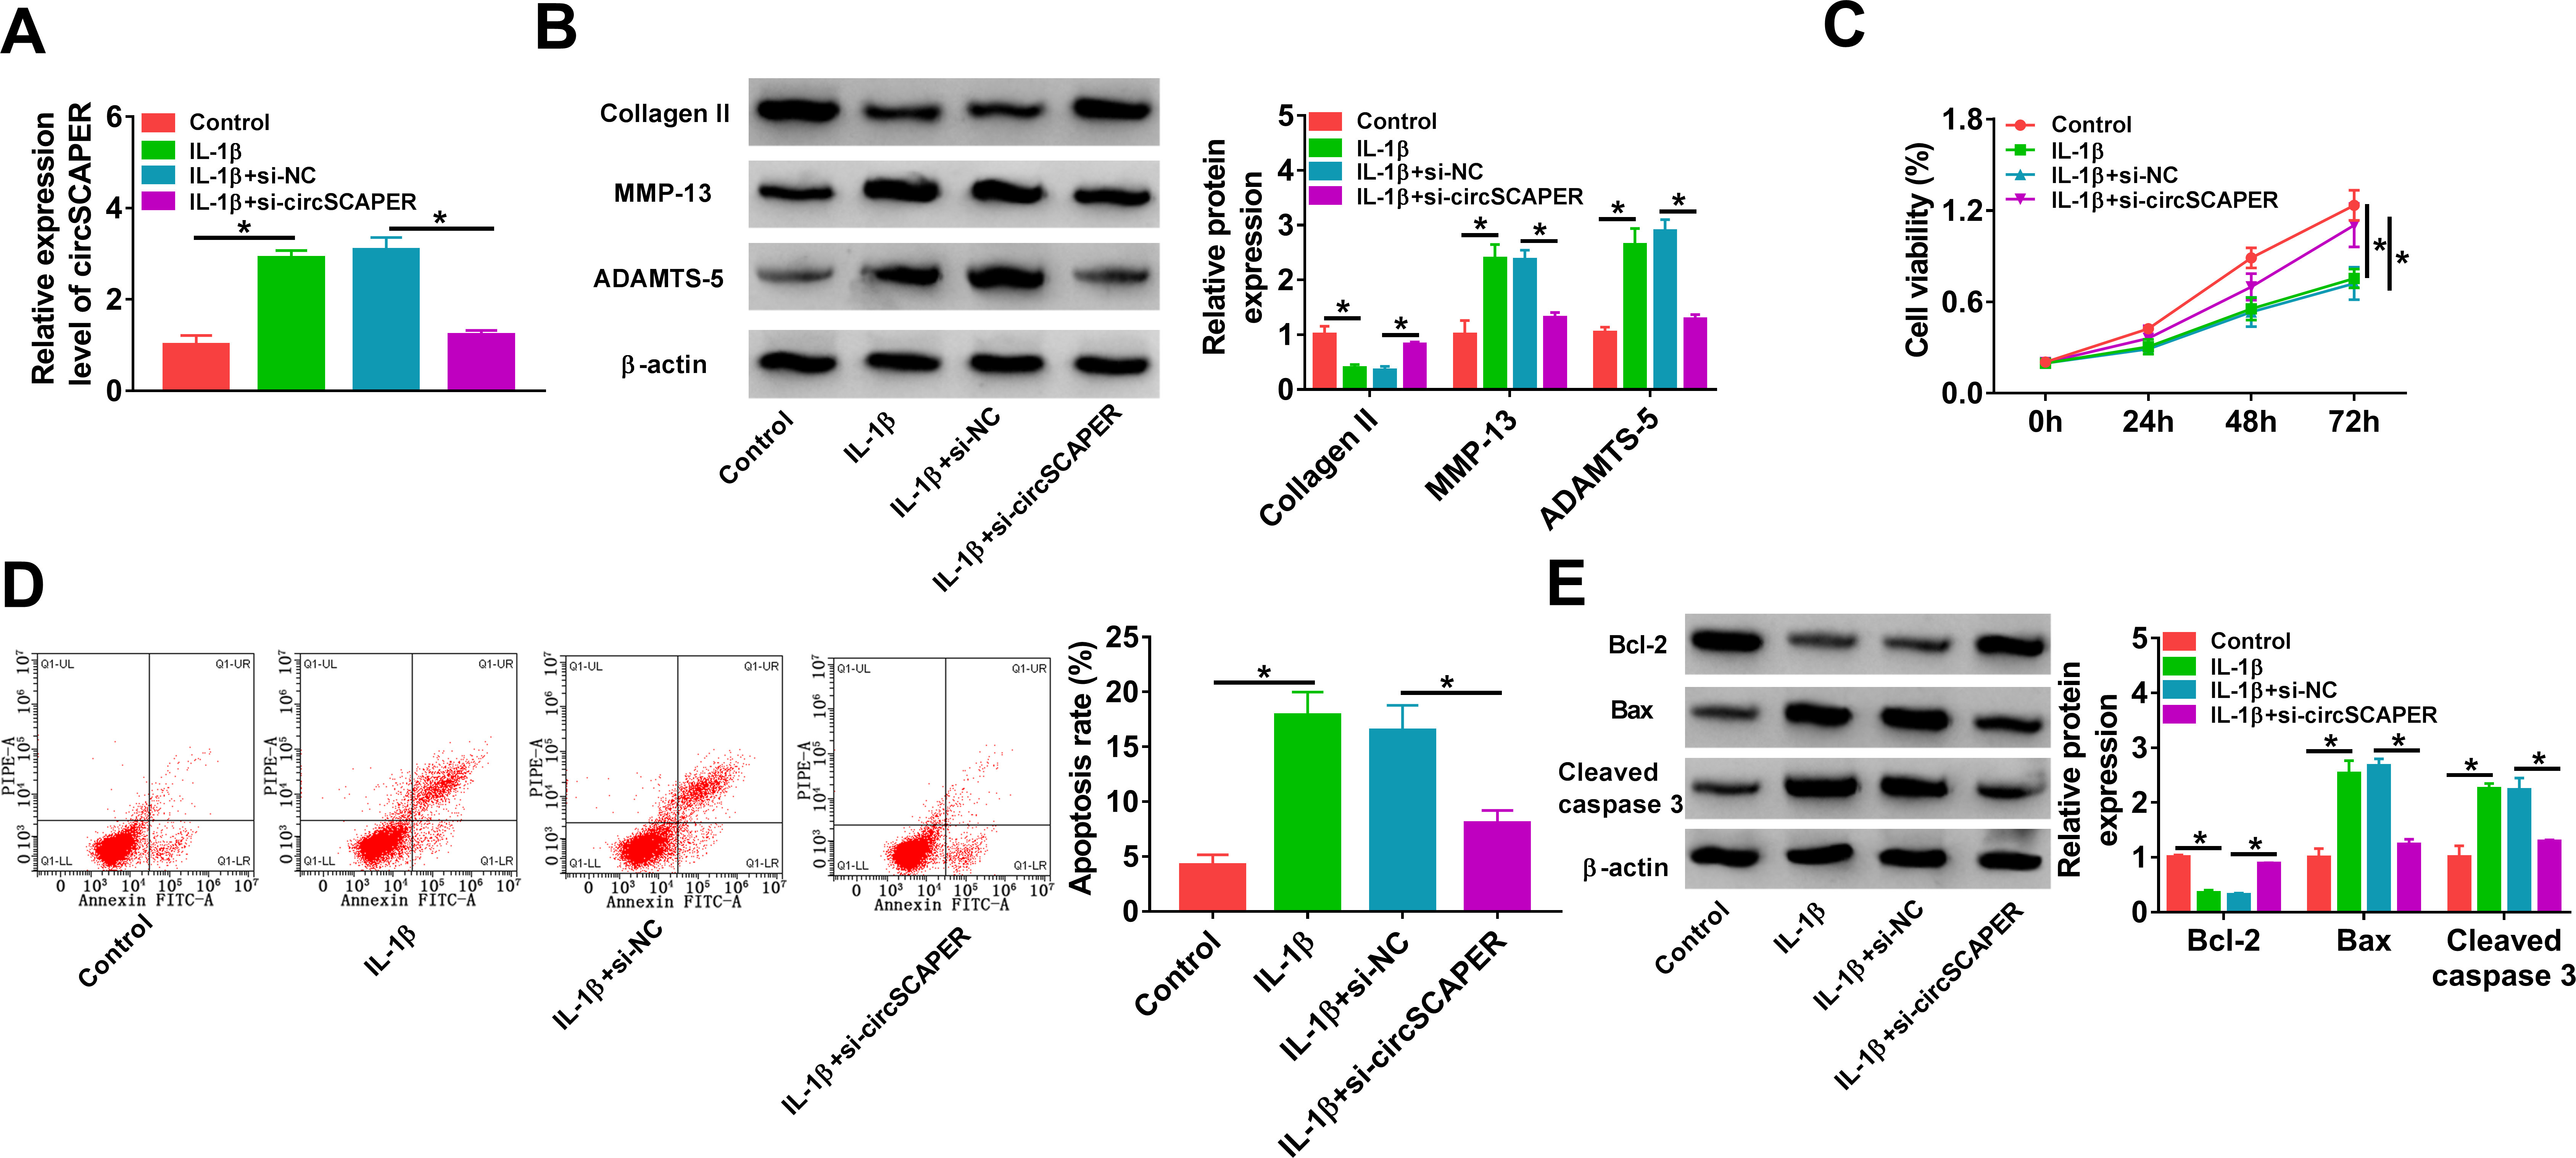 Fig. 2 
            CircSCAPER knockdown attenuates interleukin (IL)-1β-induced chondrocyte dysfunction. a) to e) C28/I2 cells were transfected with circSCAPER-specific small interfering RNA (siRNA) (si-circSCAPER) and negative control (si-NC), followed by treatment with IL-1β (10 ng/l) for 24 hours. a) Quantitative real-time polymerase chain reaction (qRT-PCR) analysis of circSCAPER expression in cells. b) Western blot analysis of matrix metallopeptidase 13 (MMP-13), a disintegrin and metalloproteinase with thrombospondin motifs (ADAMTS-5), and collagen II protein levels in cells. c) Cell counting kit-8 (CCK-8) assay for cell proliferation. d) Flow cytometry for cell apoptosis. e) Western blot analysis of B-cell lymphoma-2 (Bcl-2), Bcl-2-associated X (Bax), and cleaved caspase 3 protein levels in cells. One-way analysis of variance (ANOVA), *p < 0.05. All of the experiments were performed in triplicate.
          